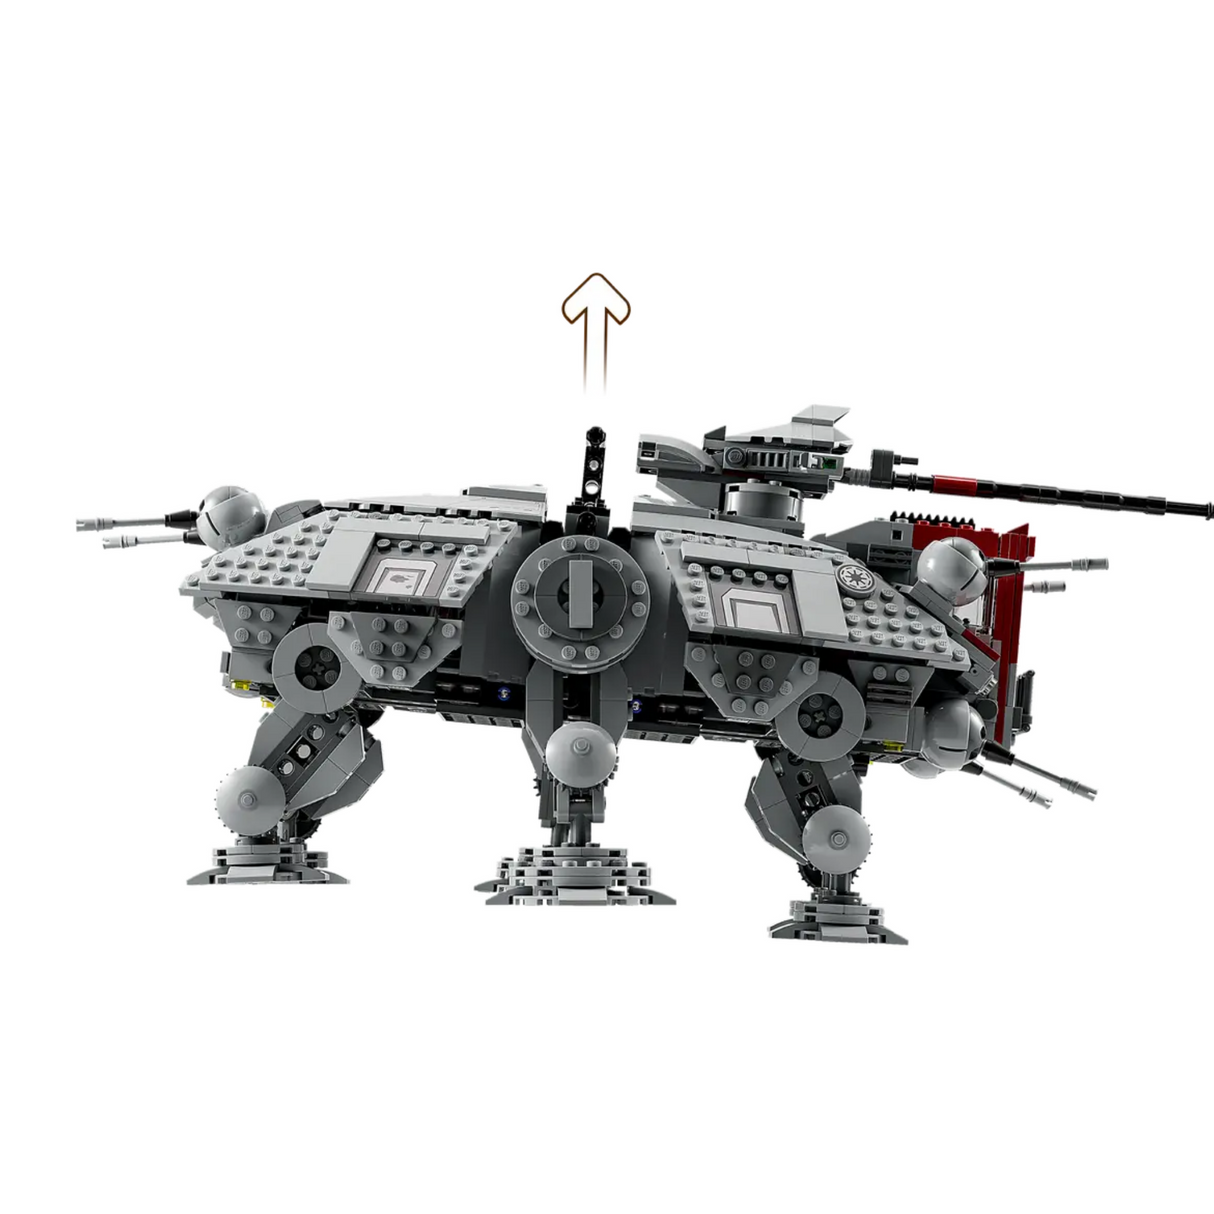 Lego® Star Wars™ At-Te™ Walker 75337 Building Kit (1,082 Pieces)